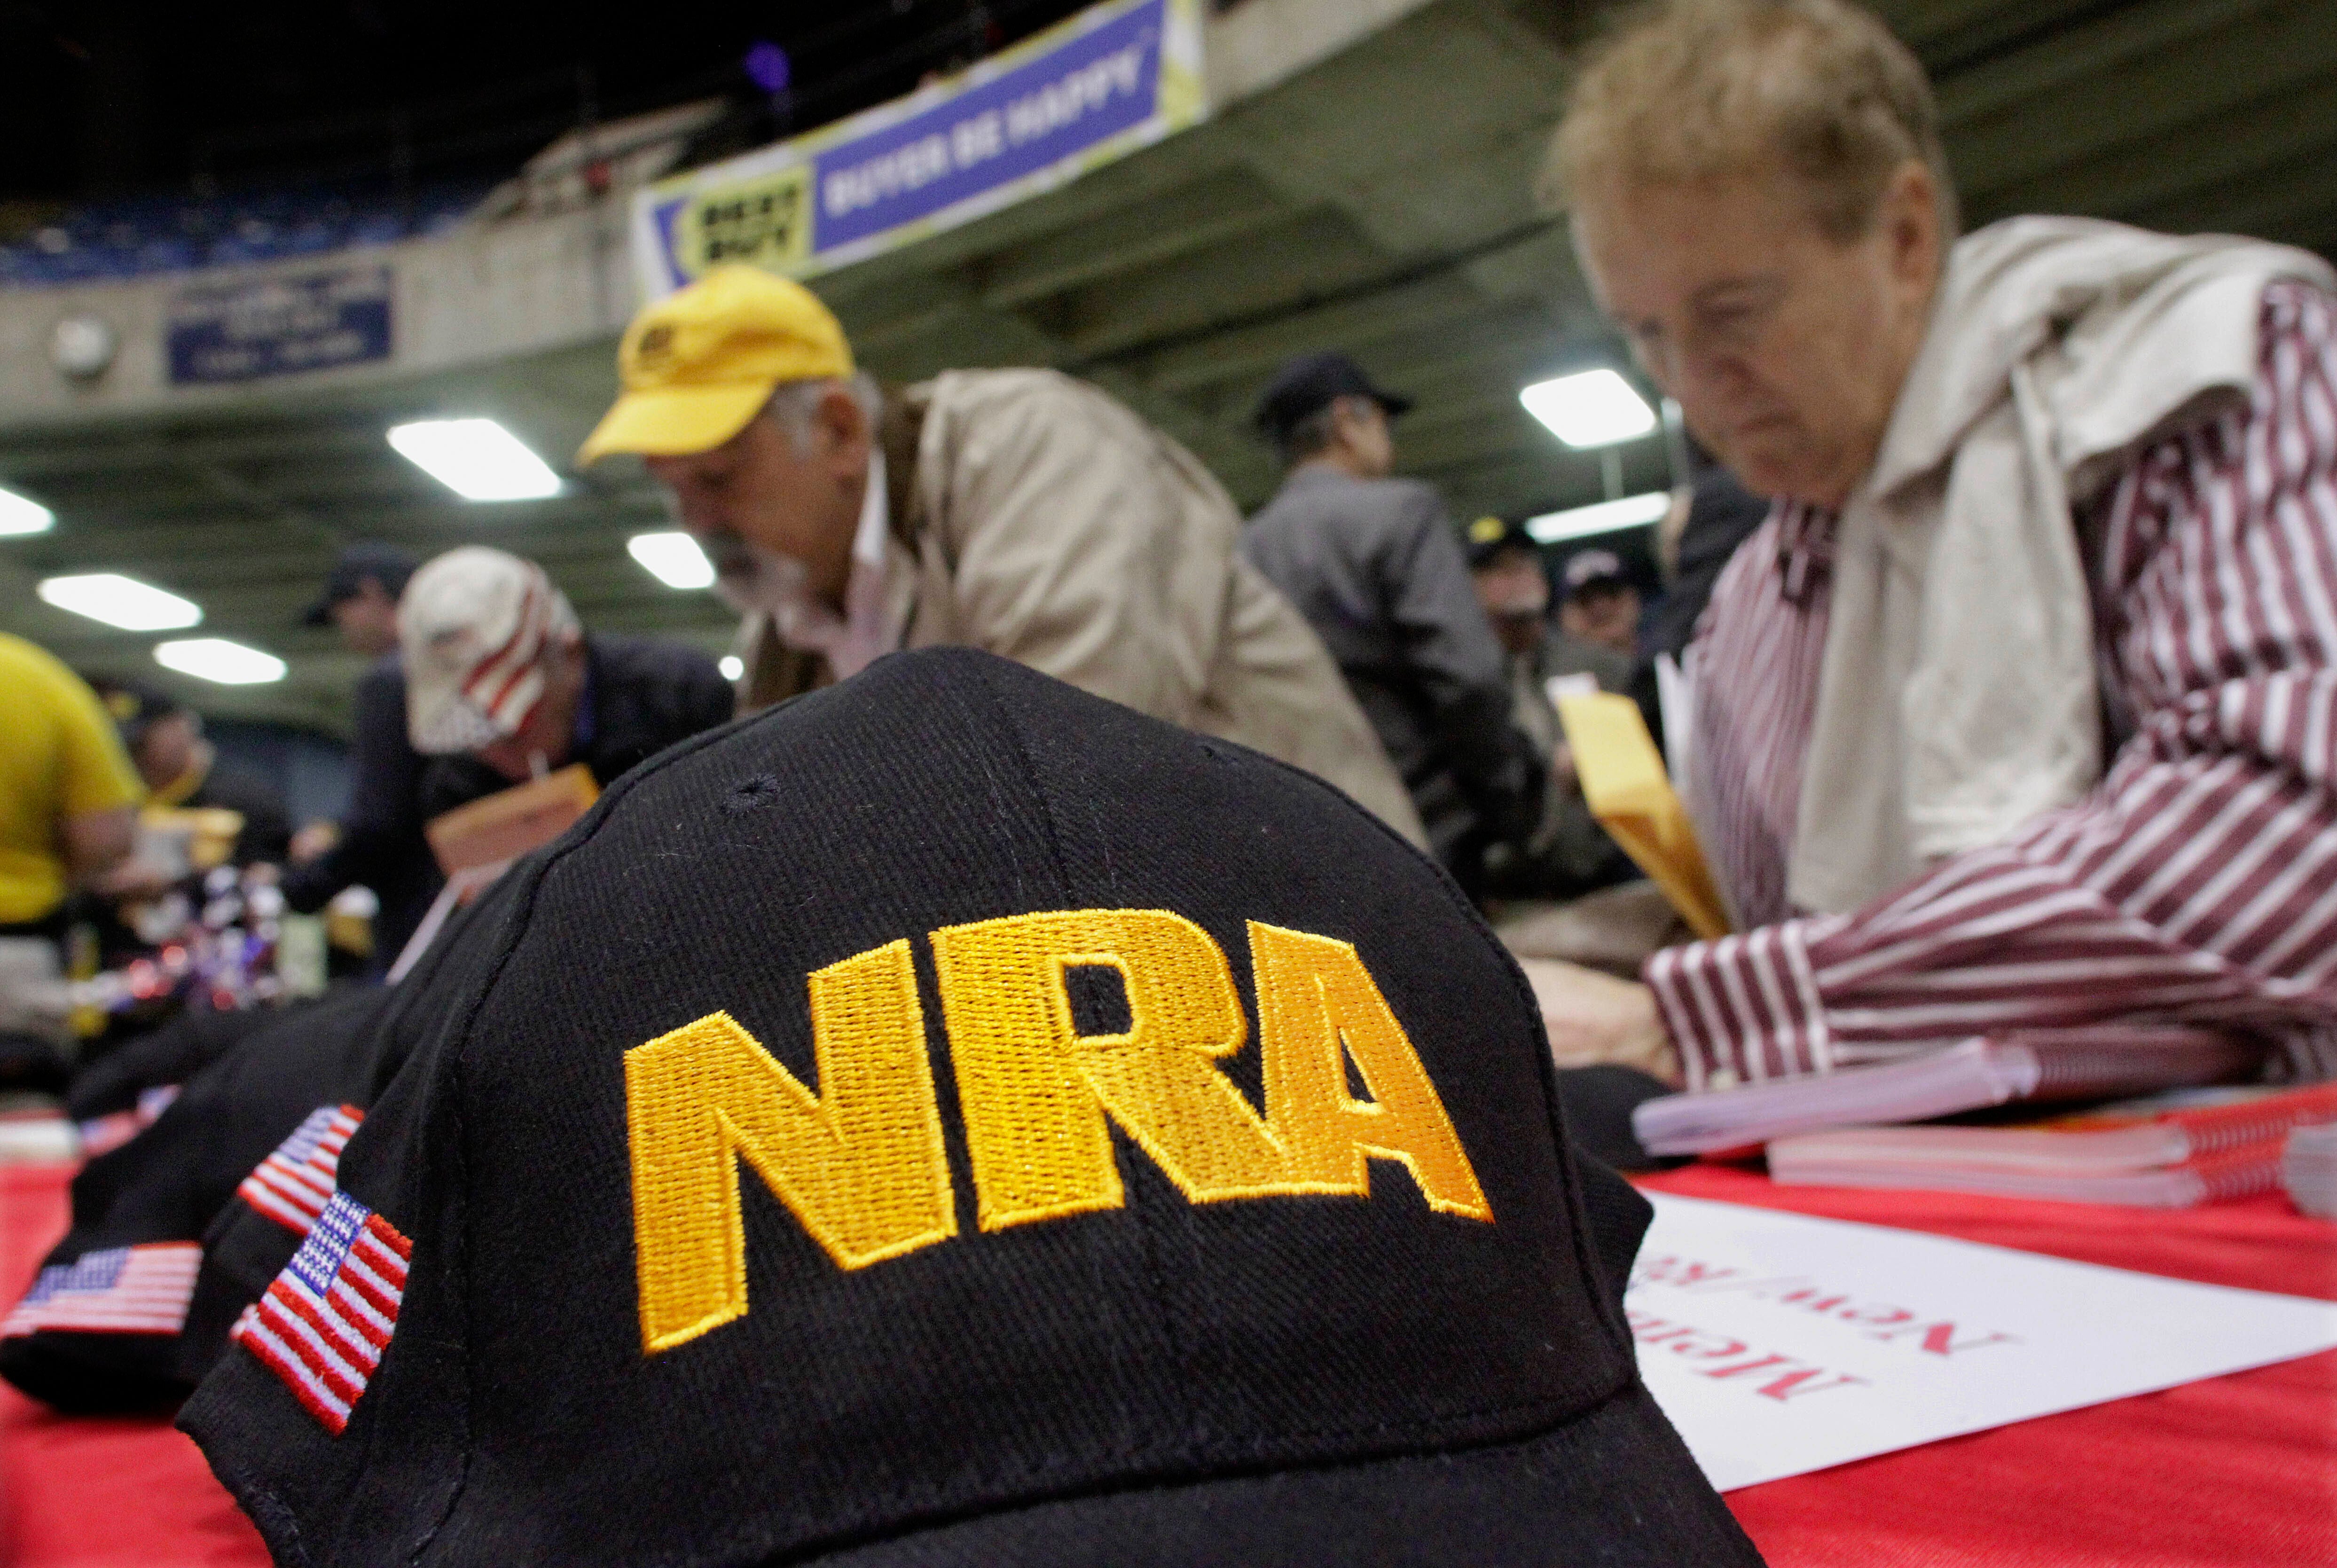 NRA petitions Supreme Court to challenge California ban on high capacity magazines